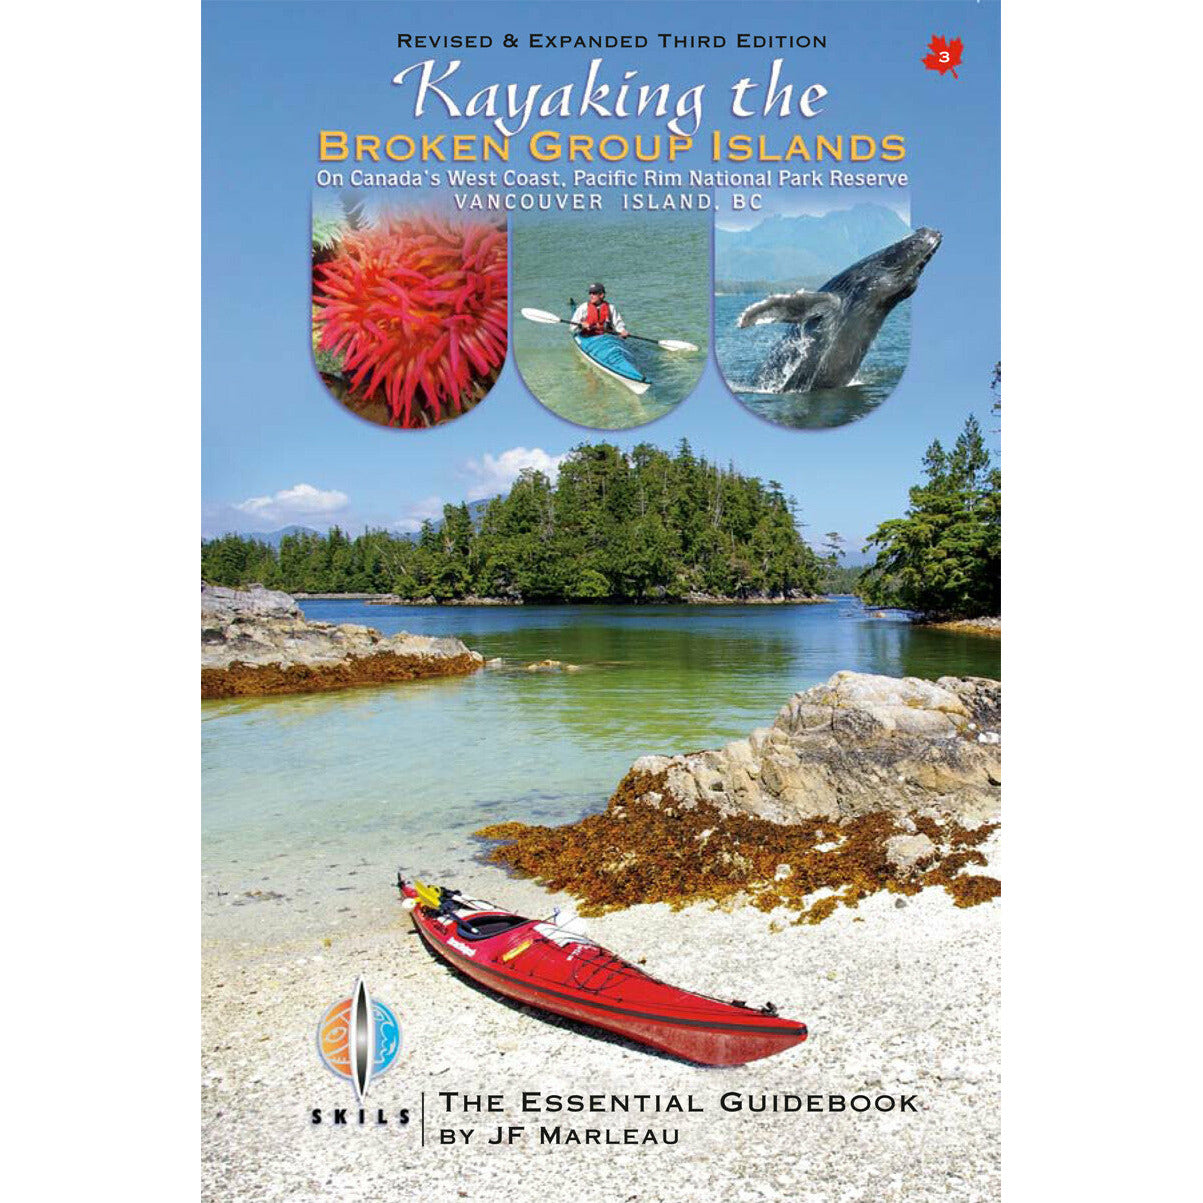 Skils - Kayaking the Broken Group Islands on Canada's West Coast, Pacific Rim National Park Reserve Vancouver Island. Third Edition (2020). Paperback.